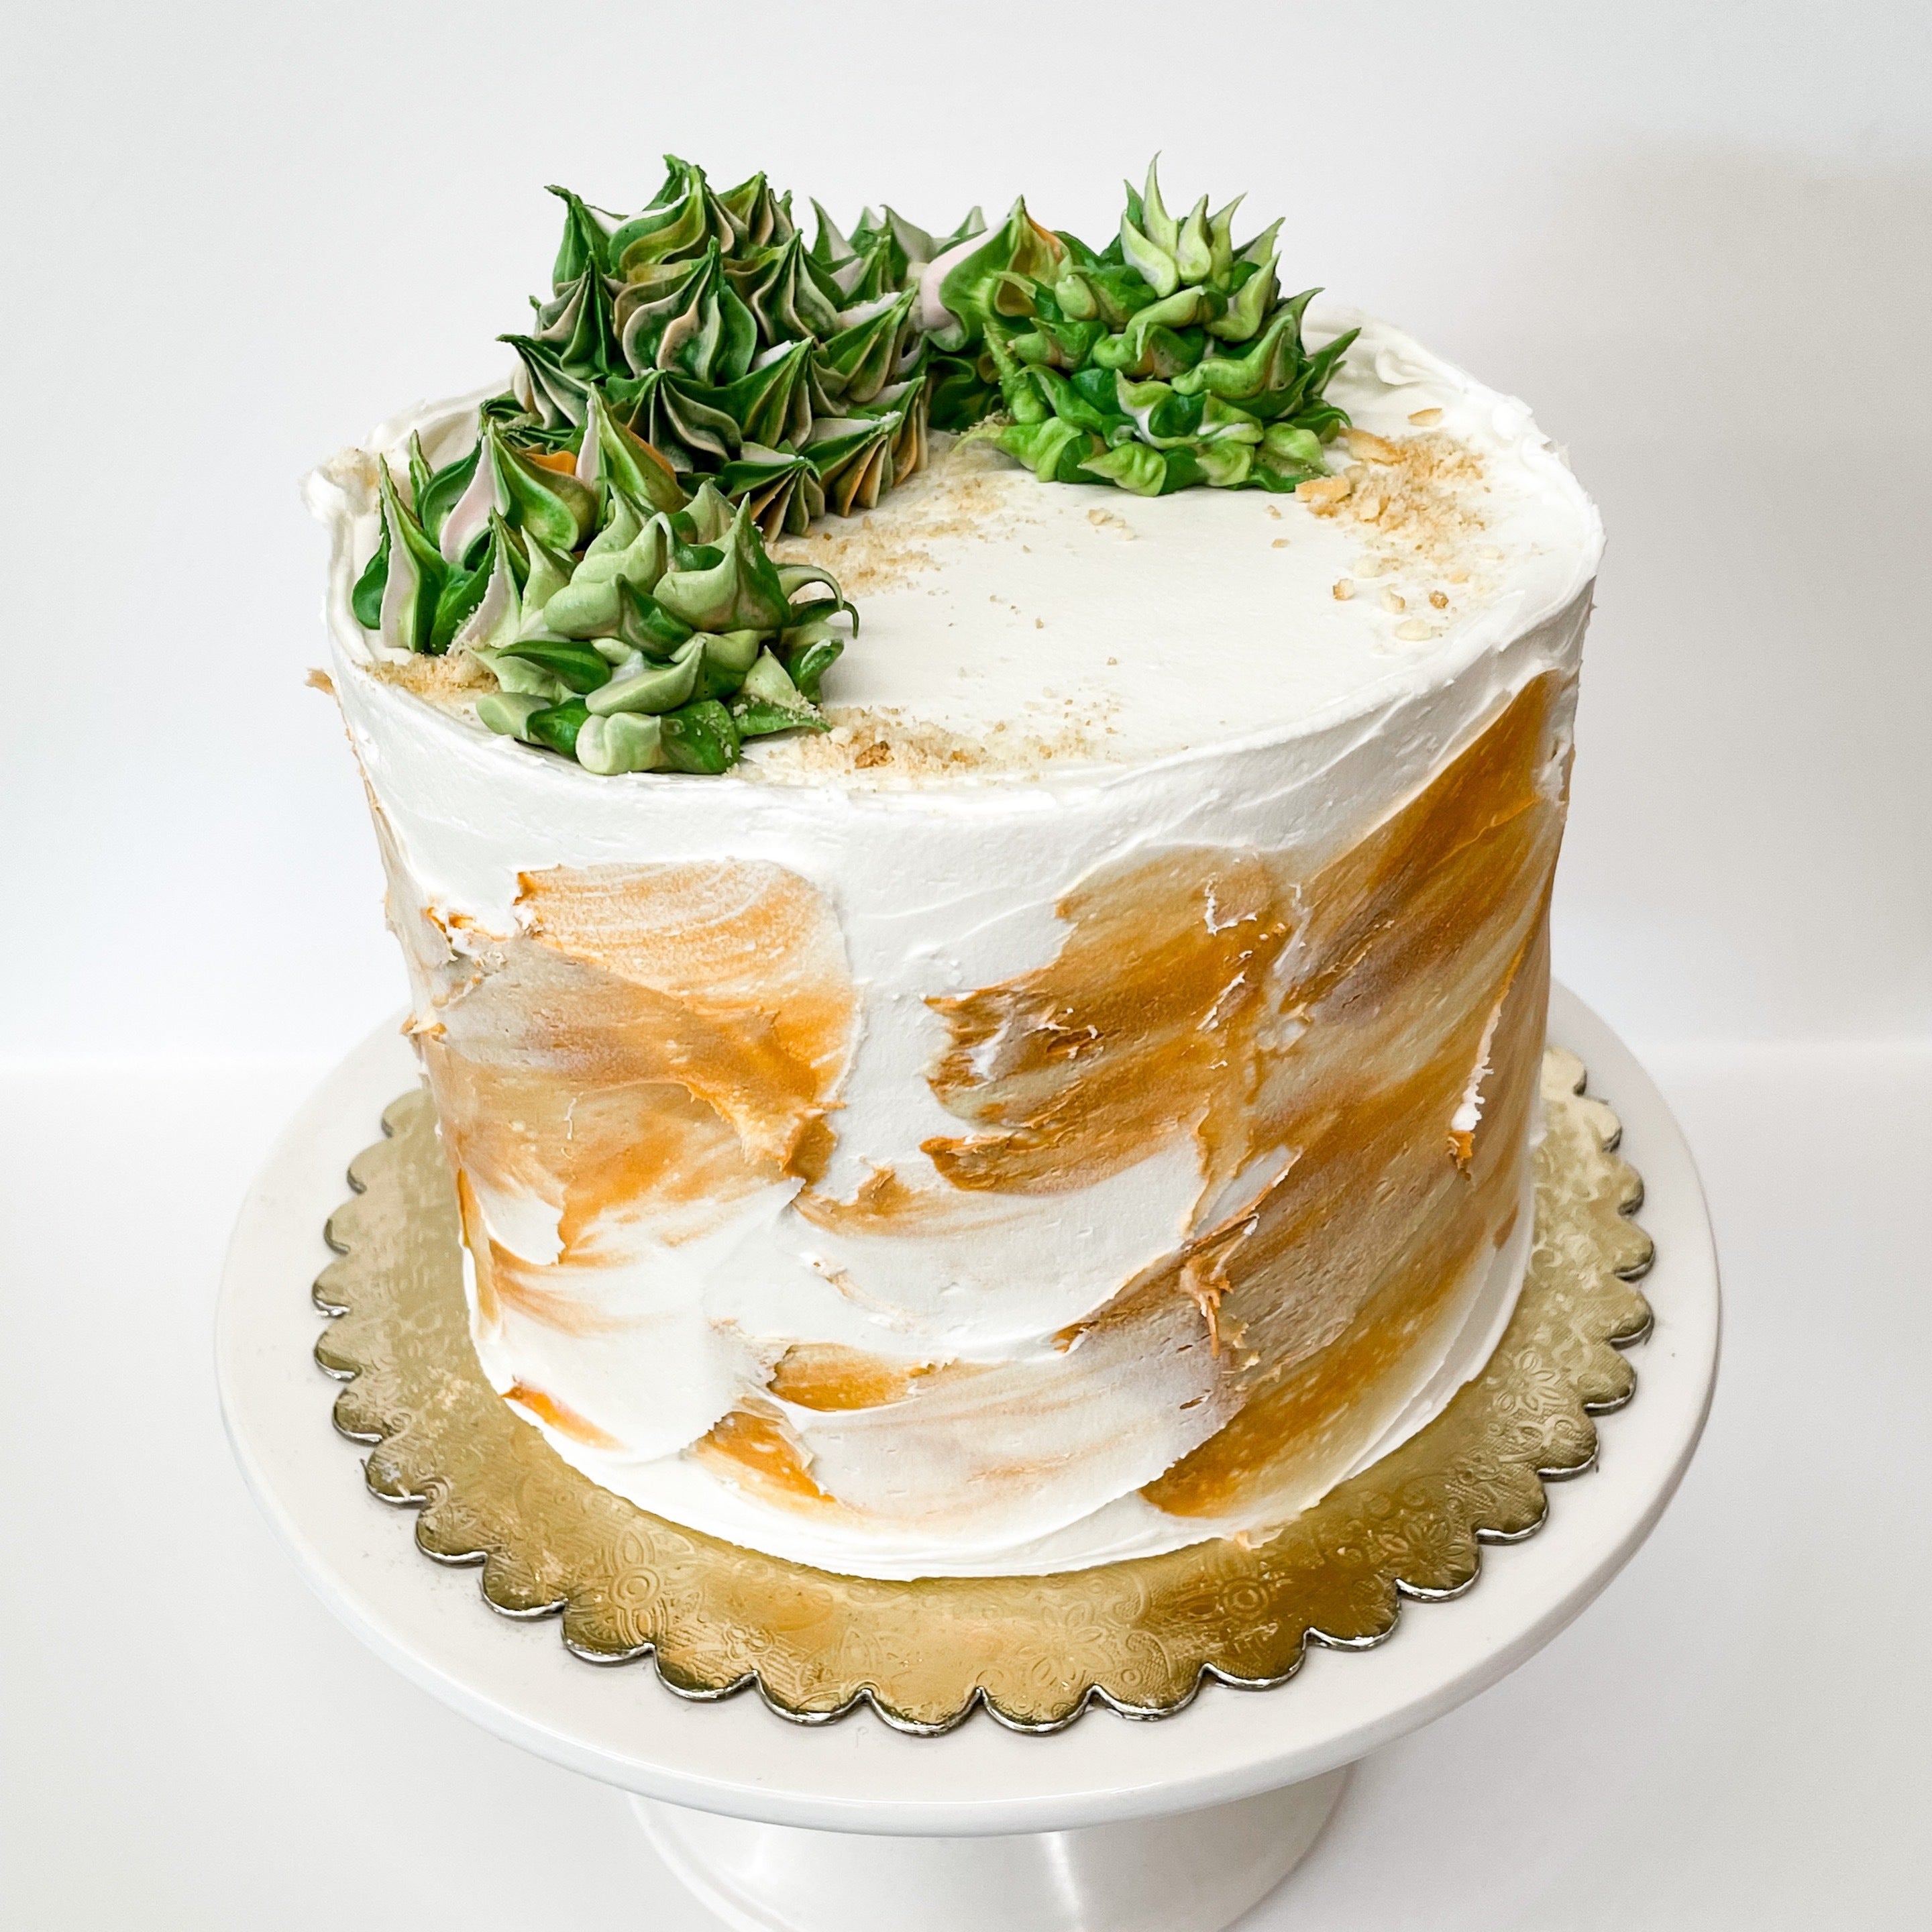 How to DIY Buttercream Succulent Cake - Step by Step - DIY 4 EVER